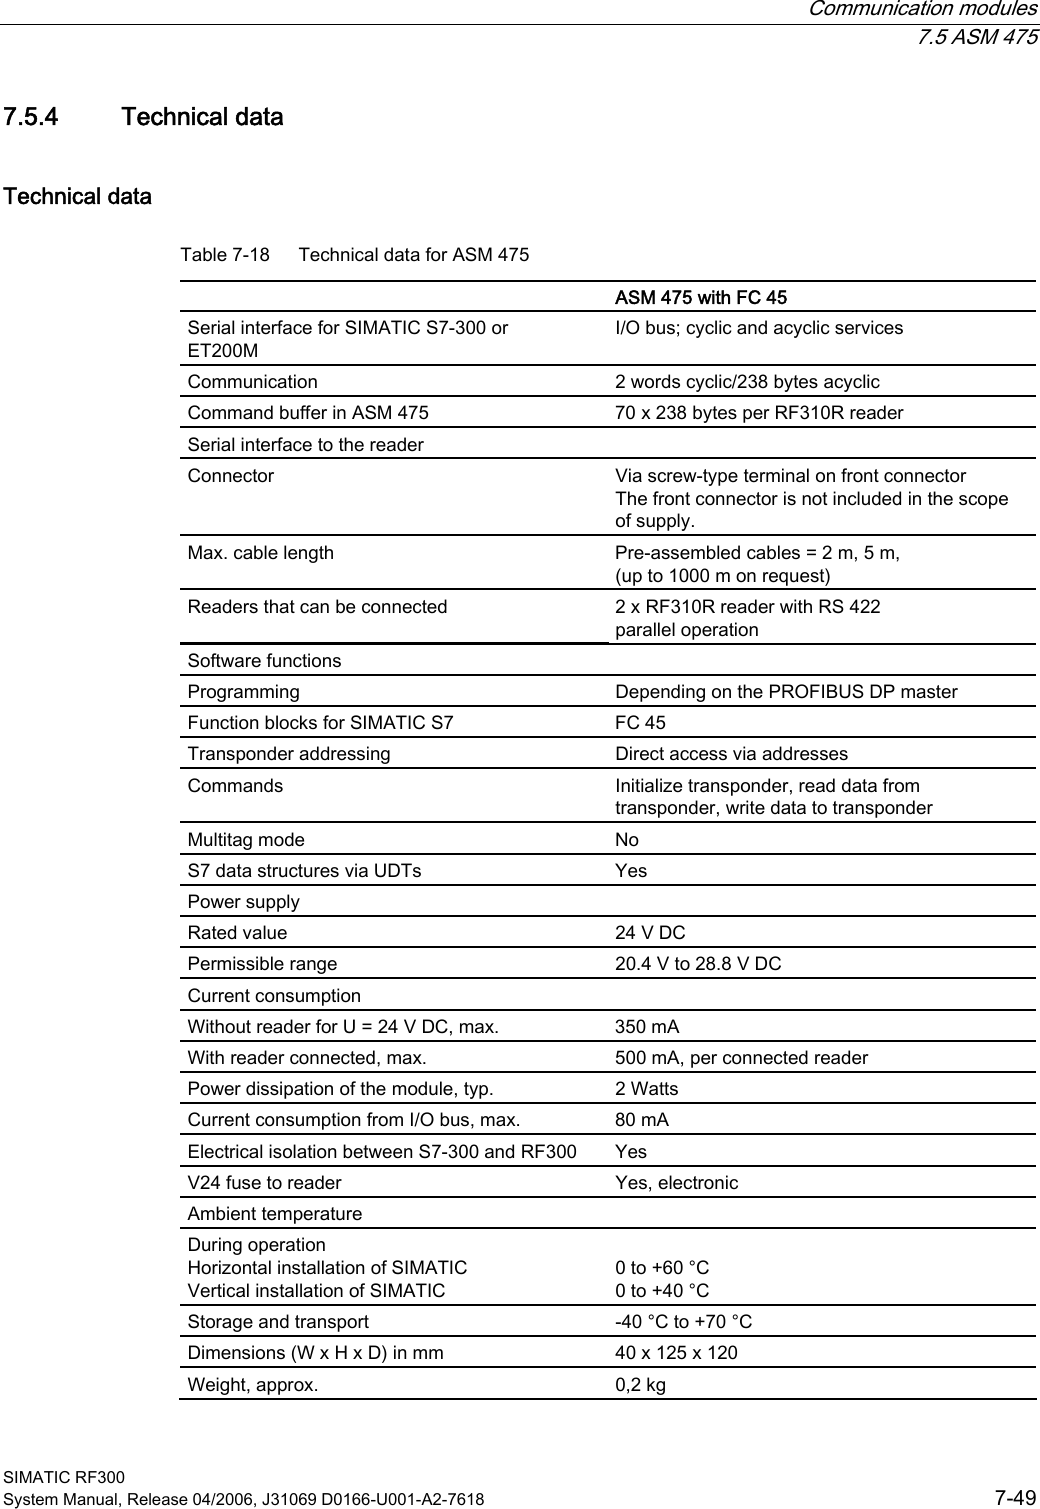  Communication modules  7.5 ASM 475 SIMATIC RF300 System Manual, Release 04/2006, J31069 D0166-U001-A2-7618  7-49 7.5.4  Technical data Technical data Table 7-18  Technical data for ASM 475   ASM 475 with FC 45 Serial interface for SIMATIC S7-300 or  ET200M I/O bus; cyclic and acyclic services Communication  2 words cyclic/238 bytes acyclic Command buffer in ASM 475  70 x 238 bytes per RF310R reader Serial interface to the reader   Connector  Via screw-type terminal on front connector The front connector is not included in the scope of supply. Max. cable length  Pre-assembled cables = 2 m, 5 m, (up to 1000 m on request) Readers that can be connected  2 x RF310R reader with RS 422 parallel operation Software functions   Programming  Depending on the PROFIBUS DP master Function blocks for SIMATIC S7  FC 45 Transponder addressing  Direct access via addresses Commands  Initialize transponder, read data from transponder, write data to transponder Multitag mode  No S7 data structures via UDTs  Yes Power supply   Rated value  24 V DC Permissible range  20.4 V to 28.8 V DC Current consumption   Without reader for U = 24 V DC, max.  350 mA With reader connected, max.  500 mA, per connected reader Power dissipation of the module, typ.  2 Watts Current consumption from I/O bus, max.  80 mA Electrical isolation between S7-300 and RF300  Yes V24 fuse to reader  Yes, electronic Ambient temperature    During operation Horizontal installation of SIMATIC Vertical installation of SIMATIC  0 to +60 °C 0 to +40 °C Storage and transport  -40 °C to +70 °C Dimensions (W x H x D) in mm  40 x 125 x 120 Weight, approx.  0,2 kg 